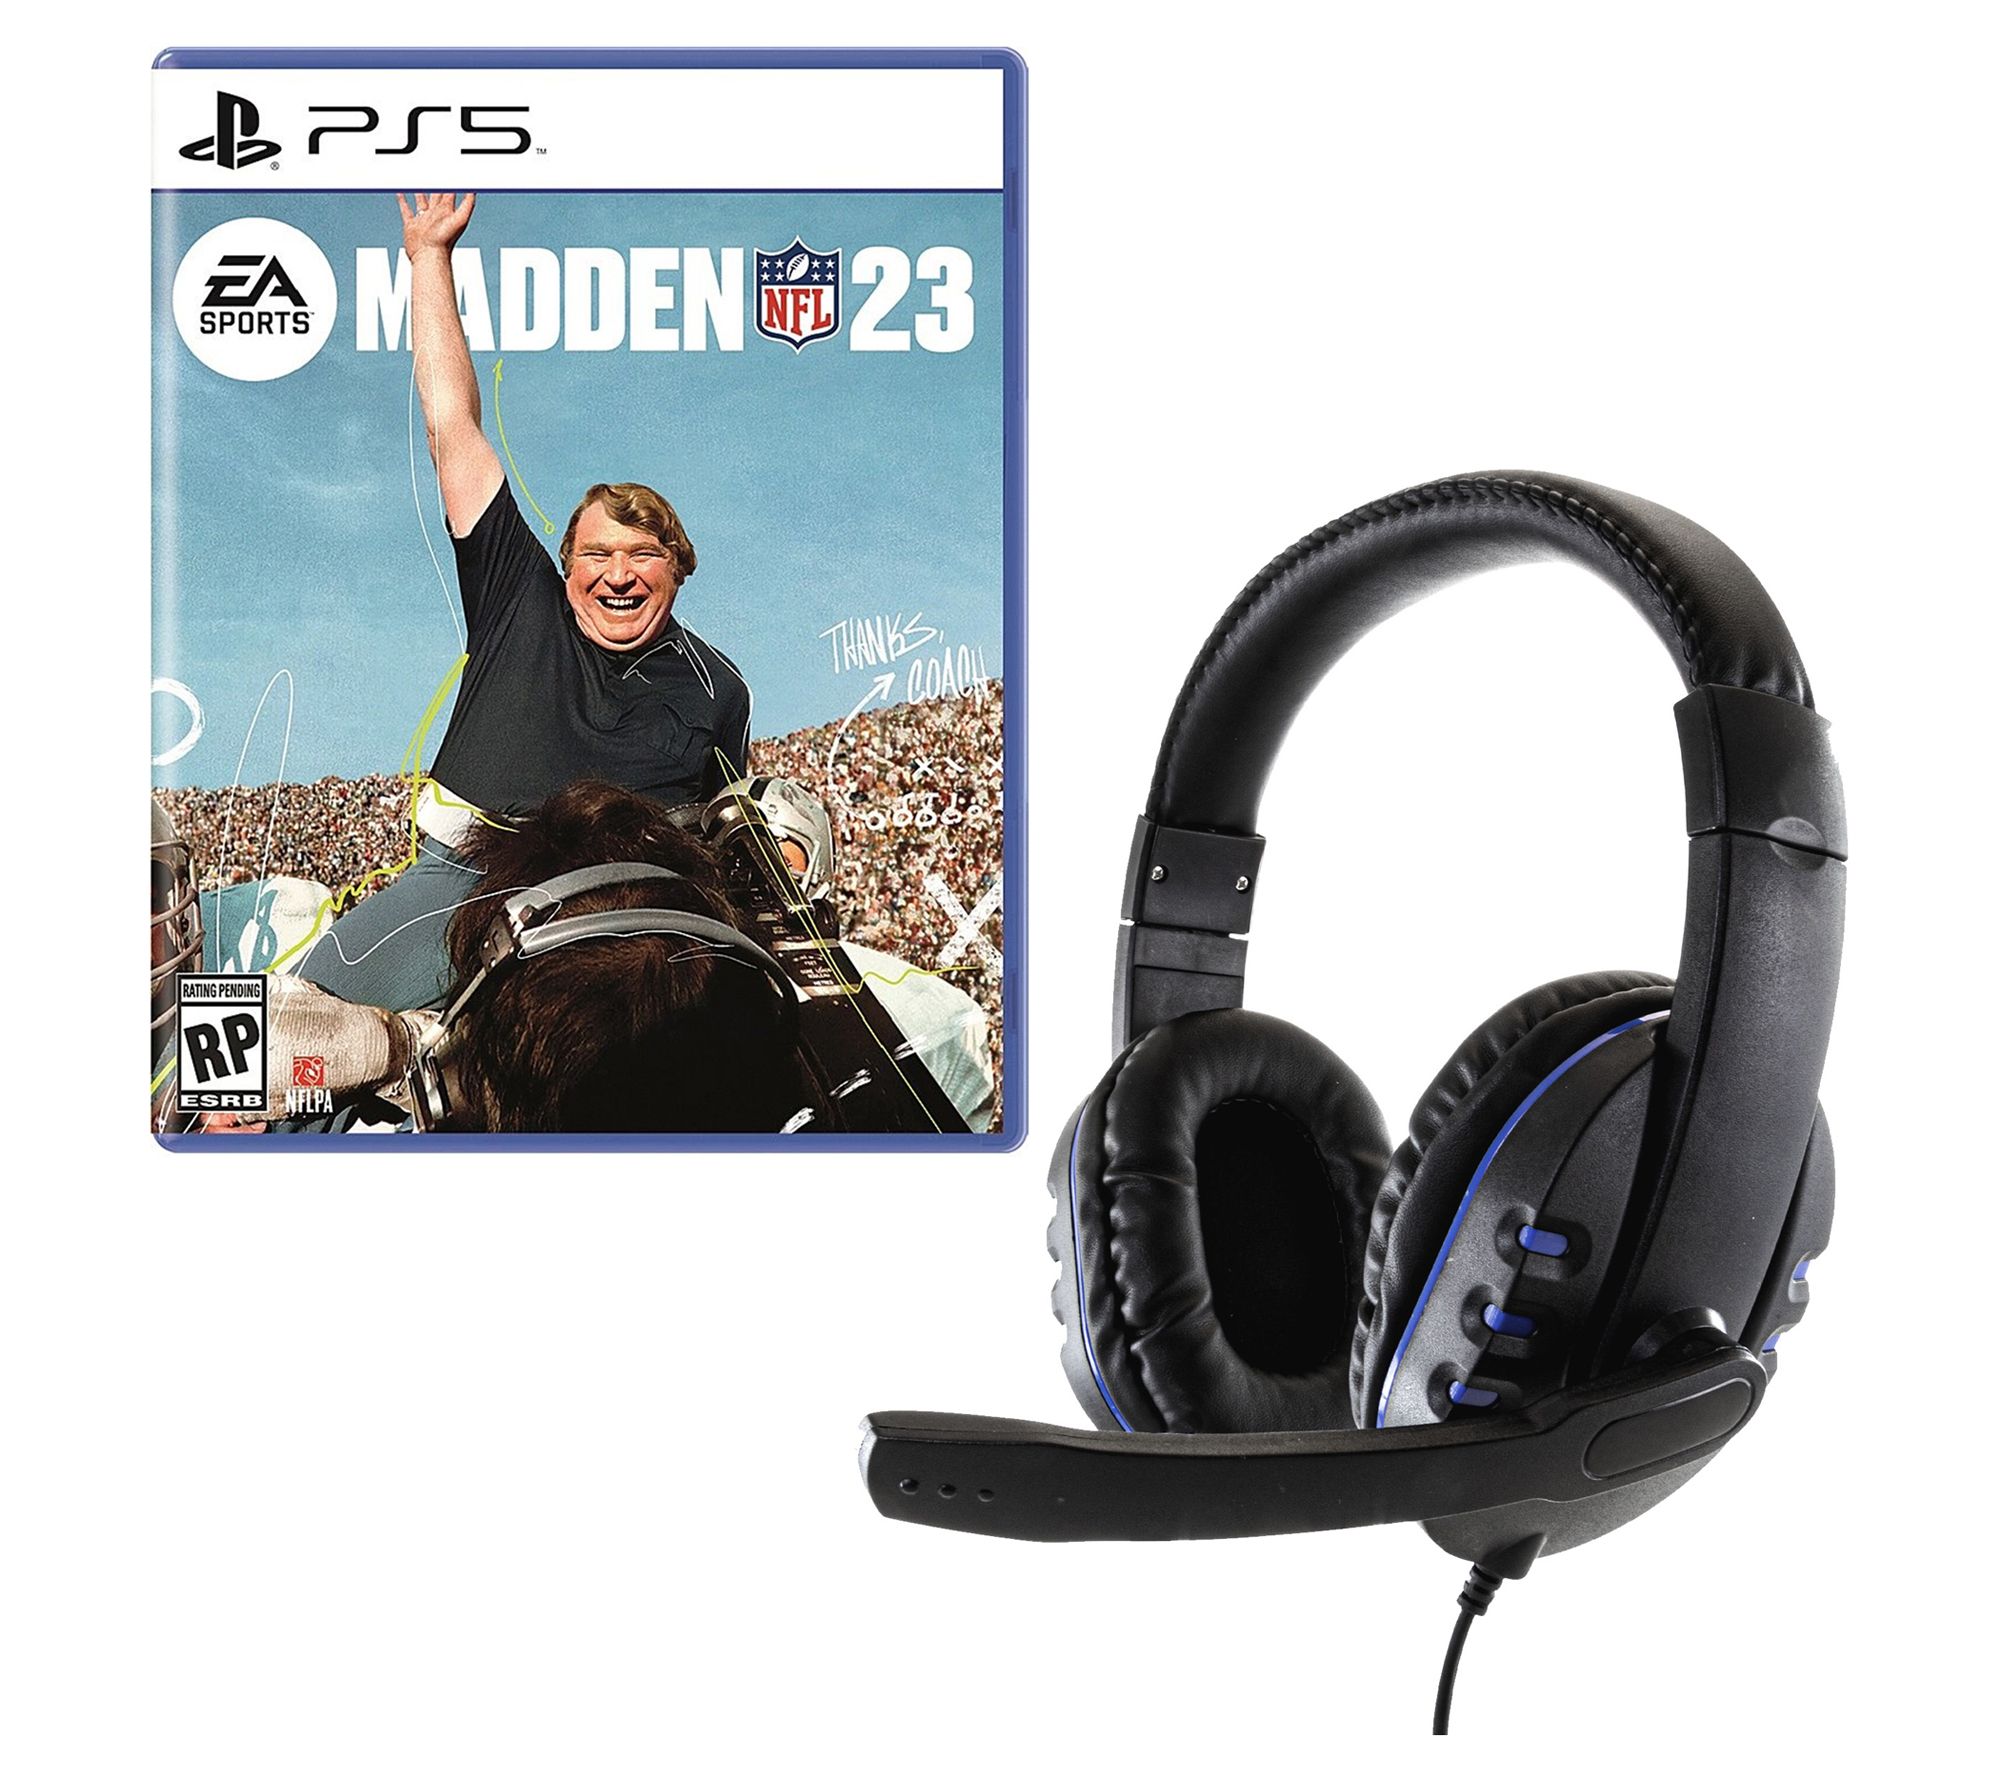 PS5 Madden NFL 23 Game w/ Universal Headset 